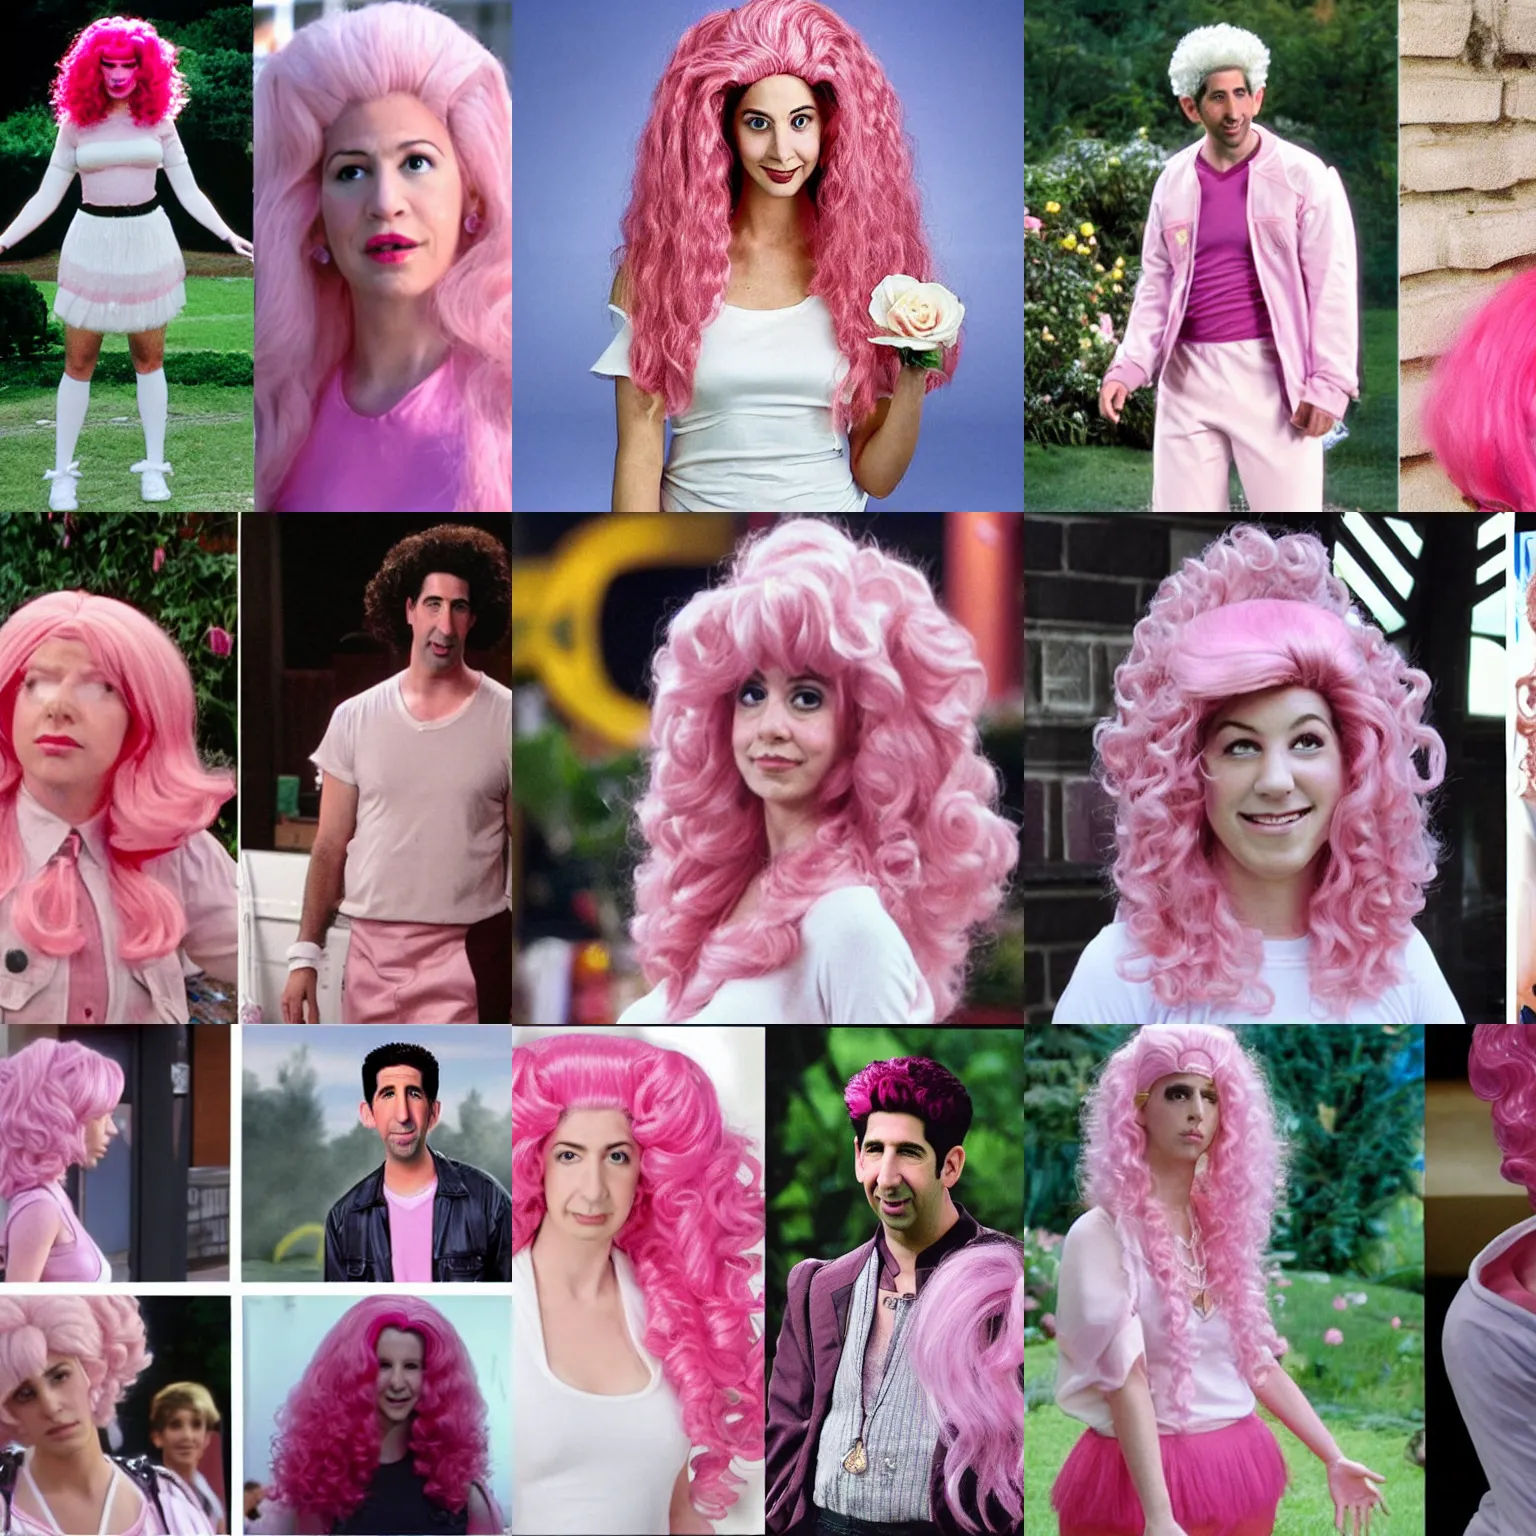 Prompt: Ross geller from friends cosplaying rose Quartz from Steven universe, wearing a gigantic curly pink wig and a white dress, Ross geller as played by David schwimmer —width 270 —height 480 —n 4 —cfg 5 —steps 50